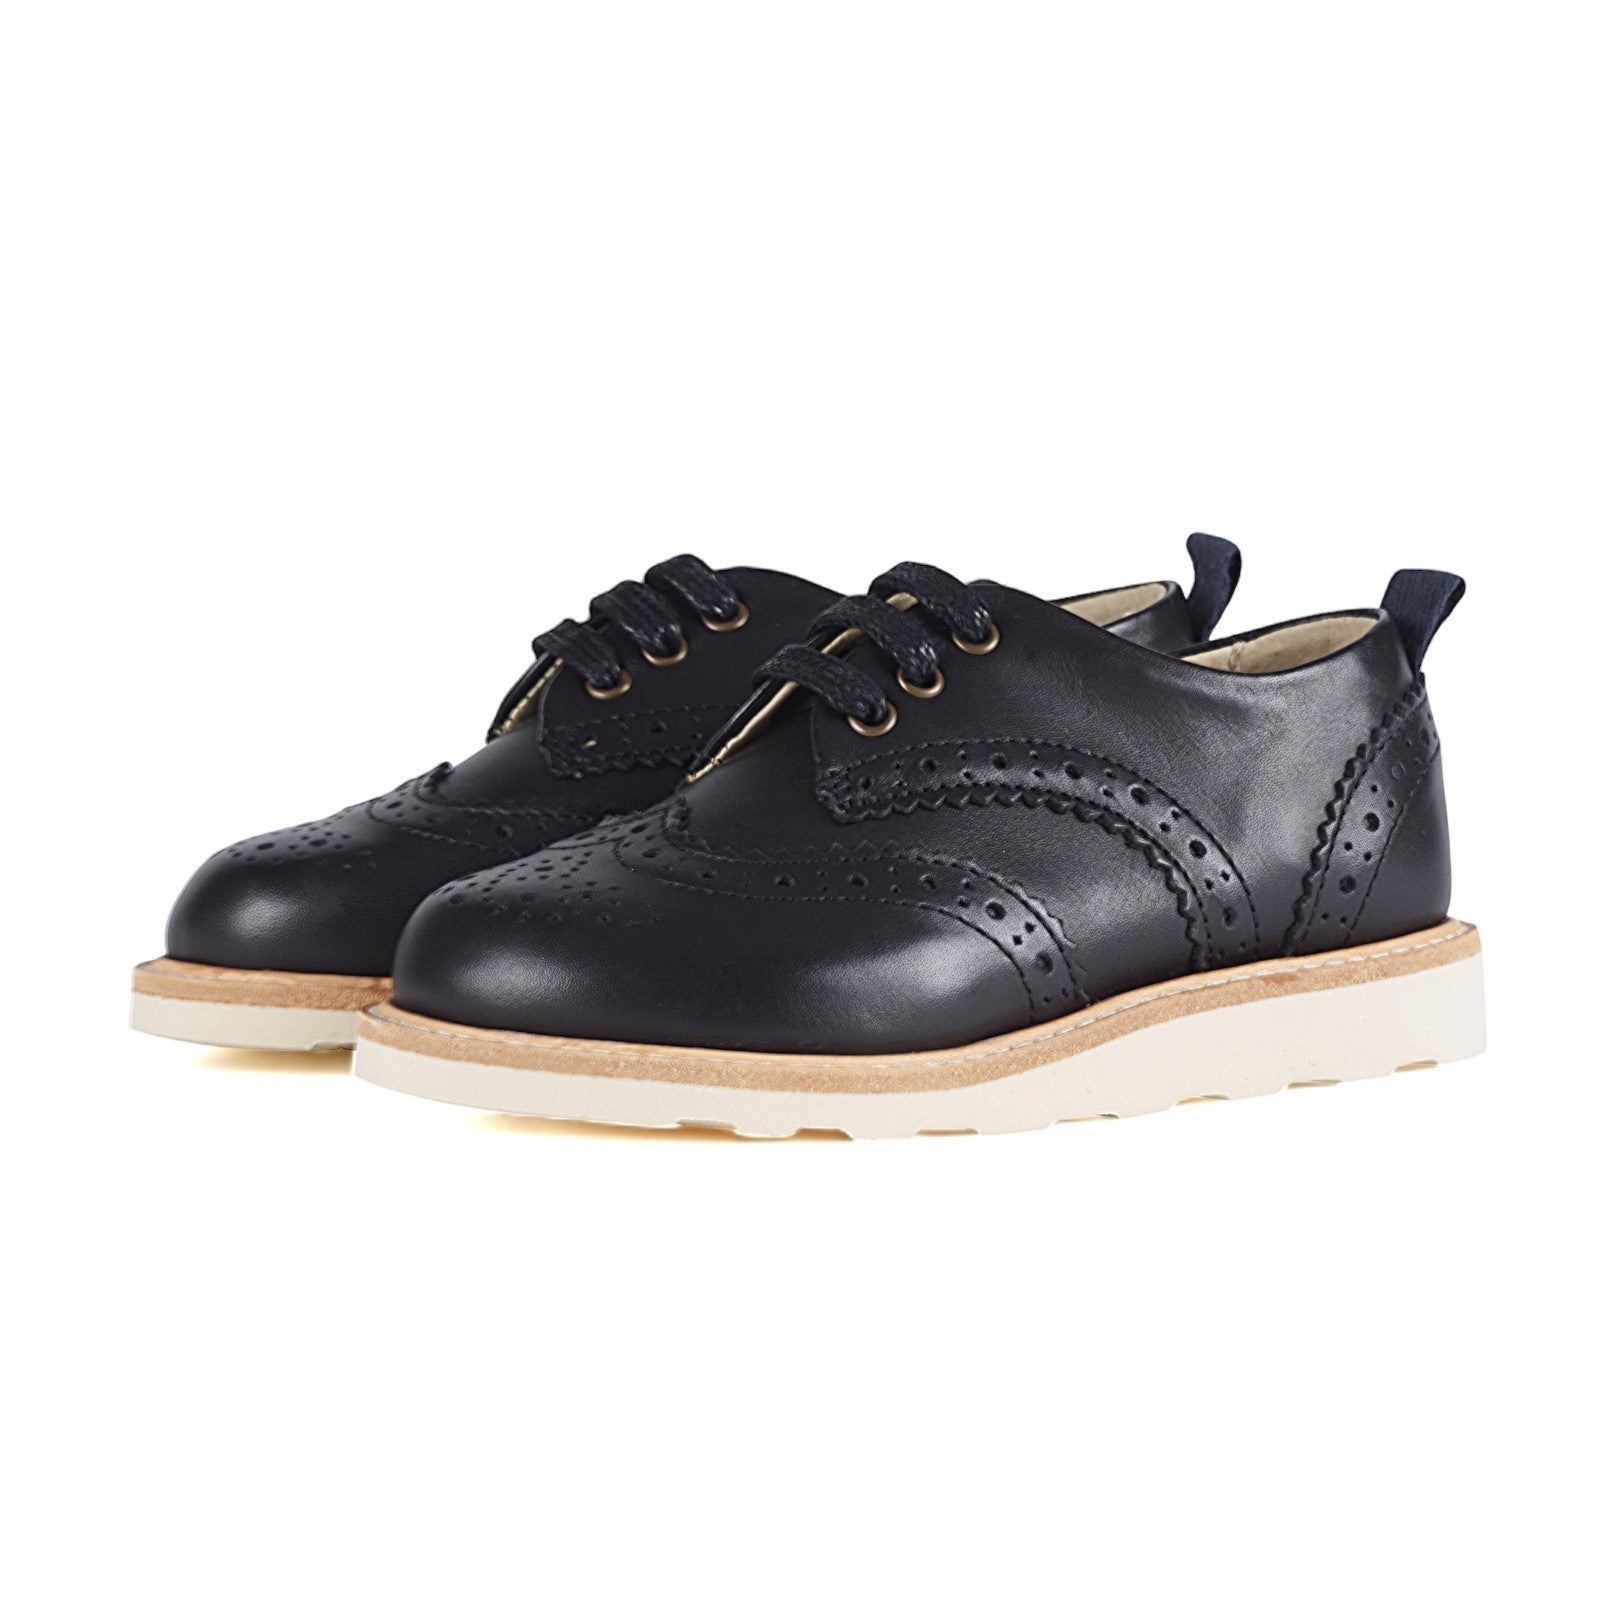 Young Soles Brando Brogue Black Leather Shoes